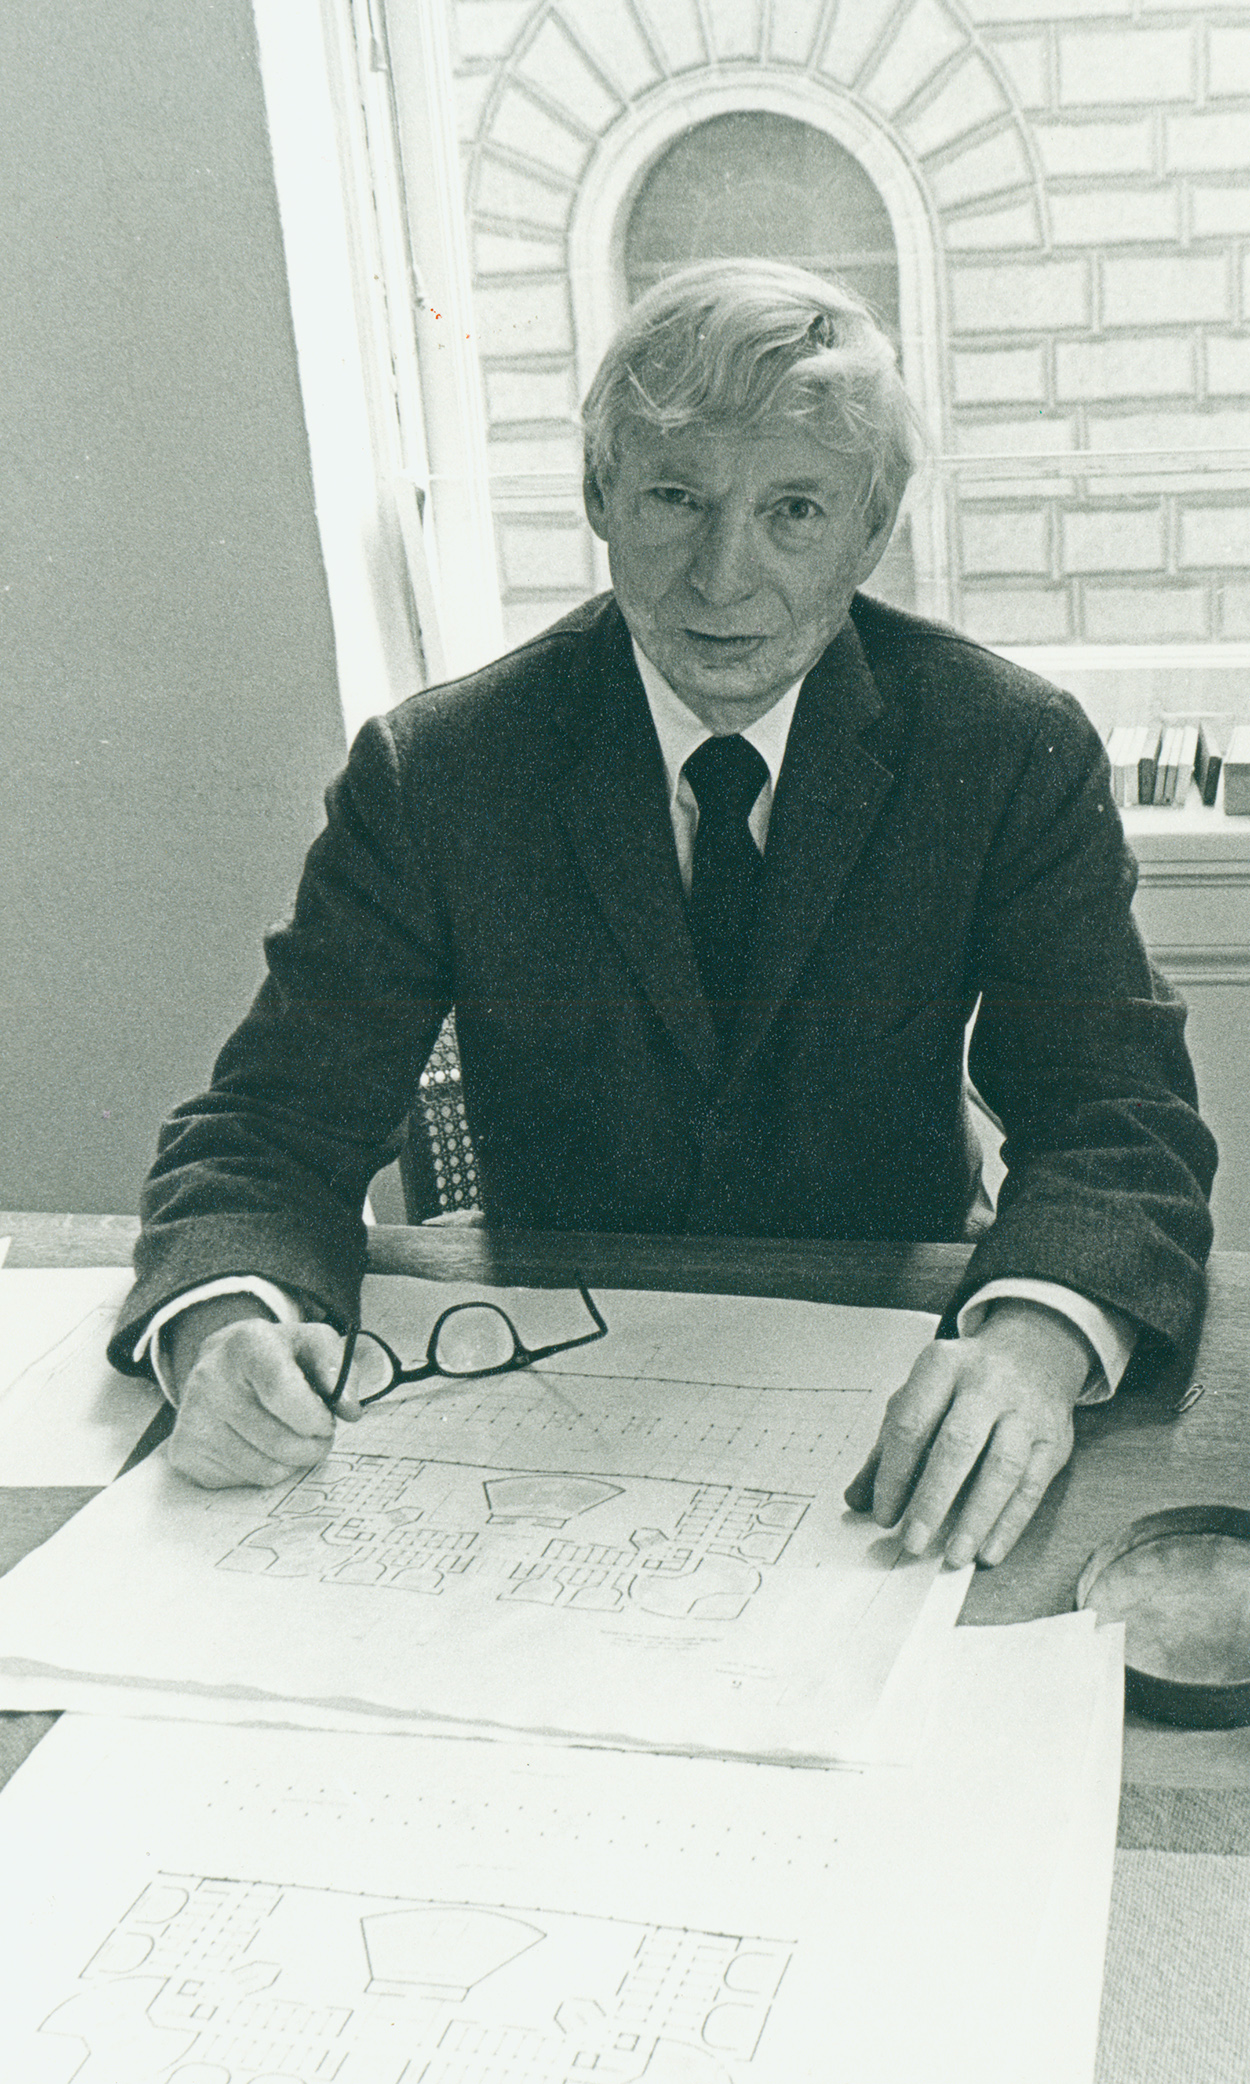 Black and white photo of Louis Kahn sitting at desk with plans in front of him